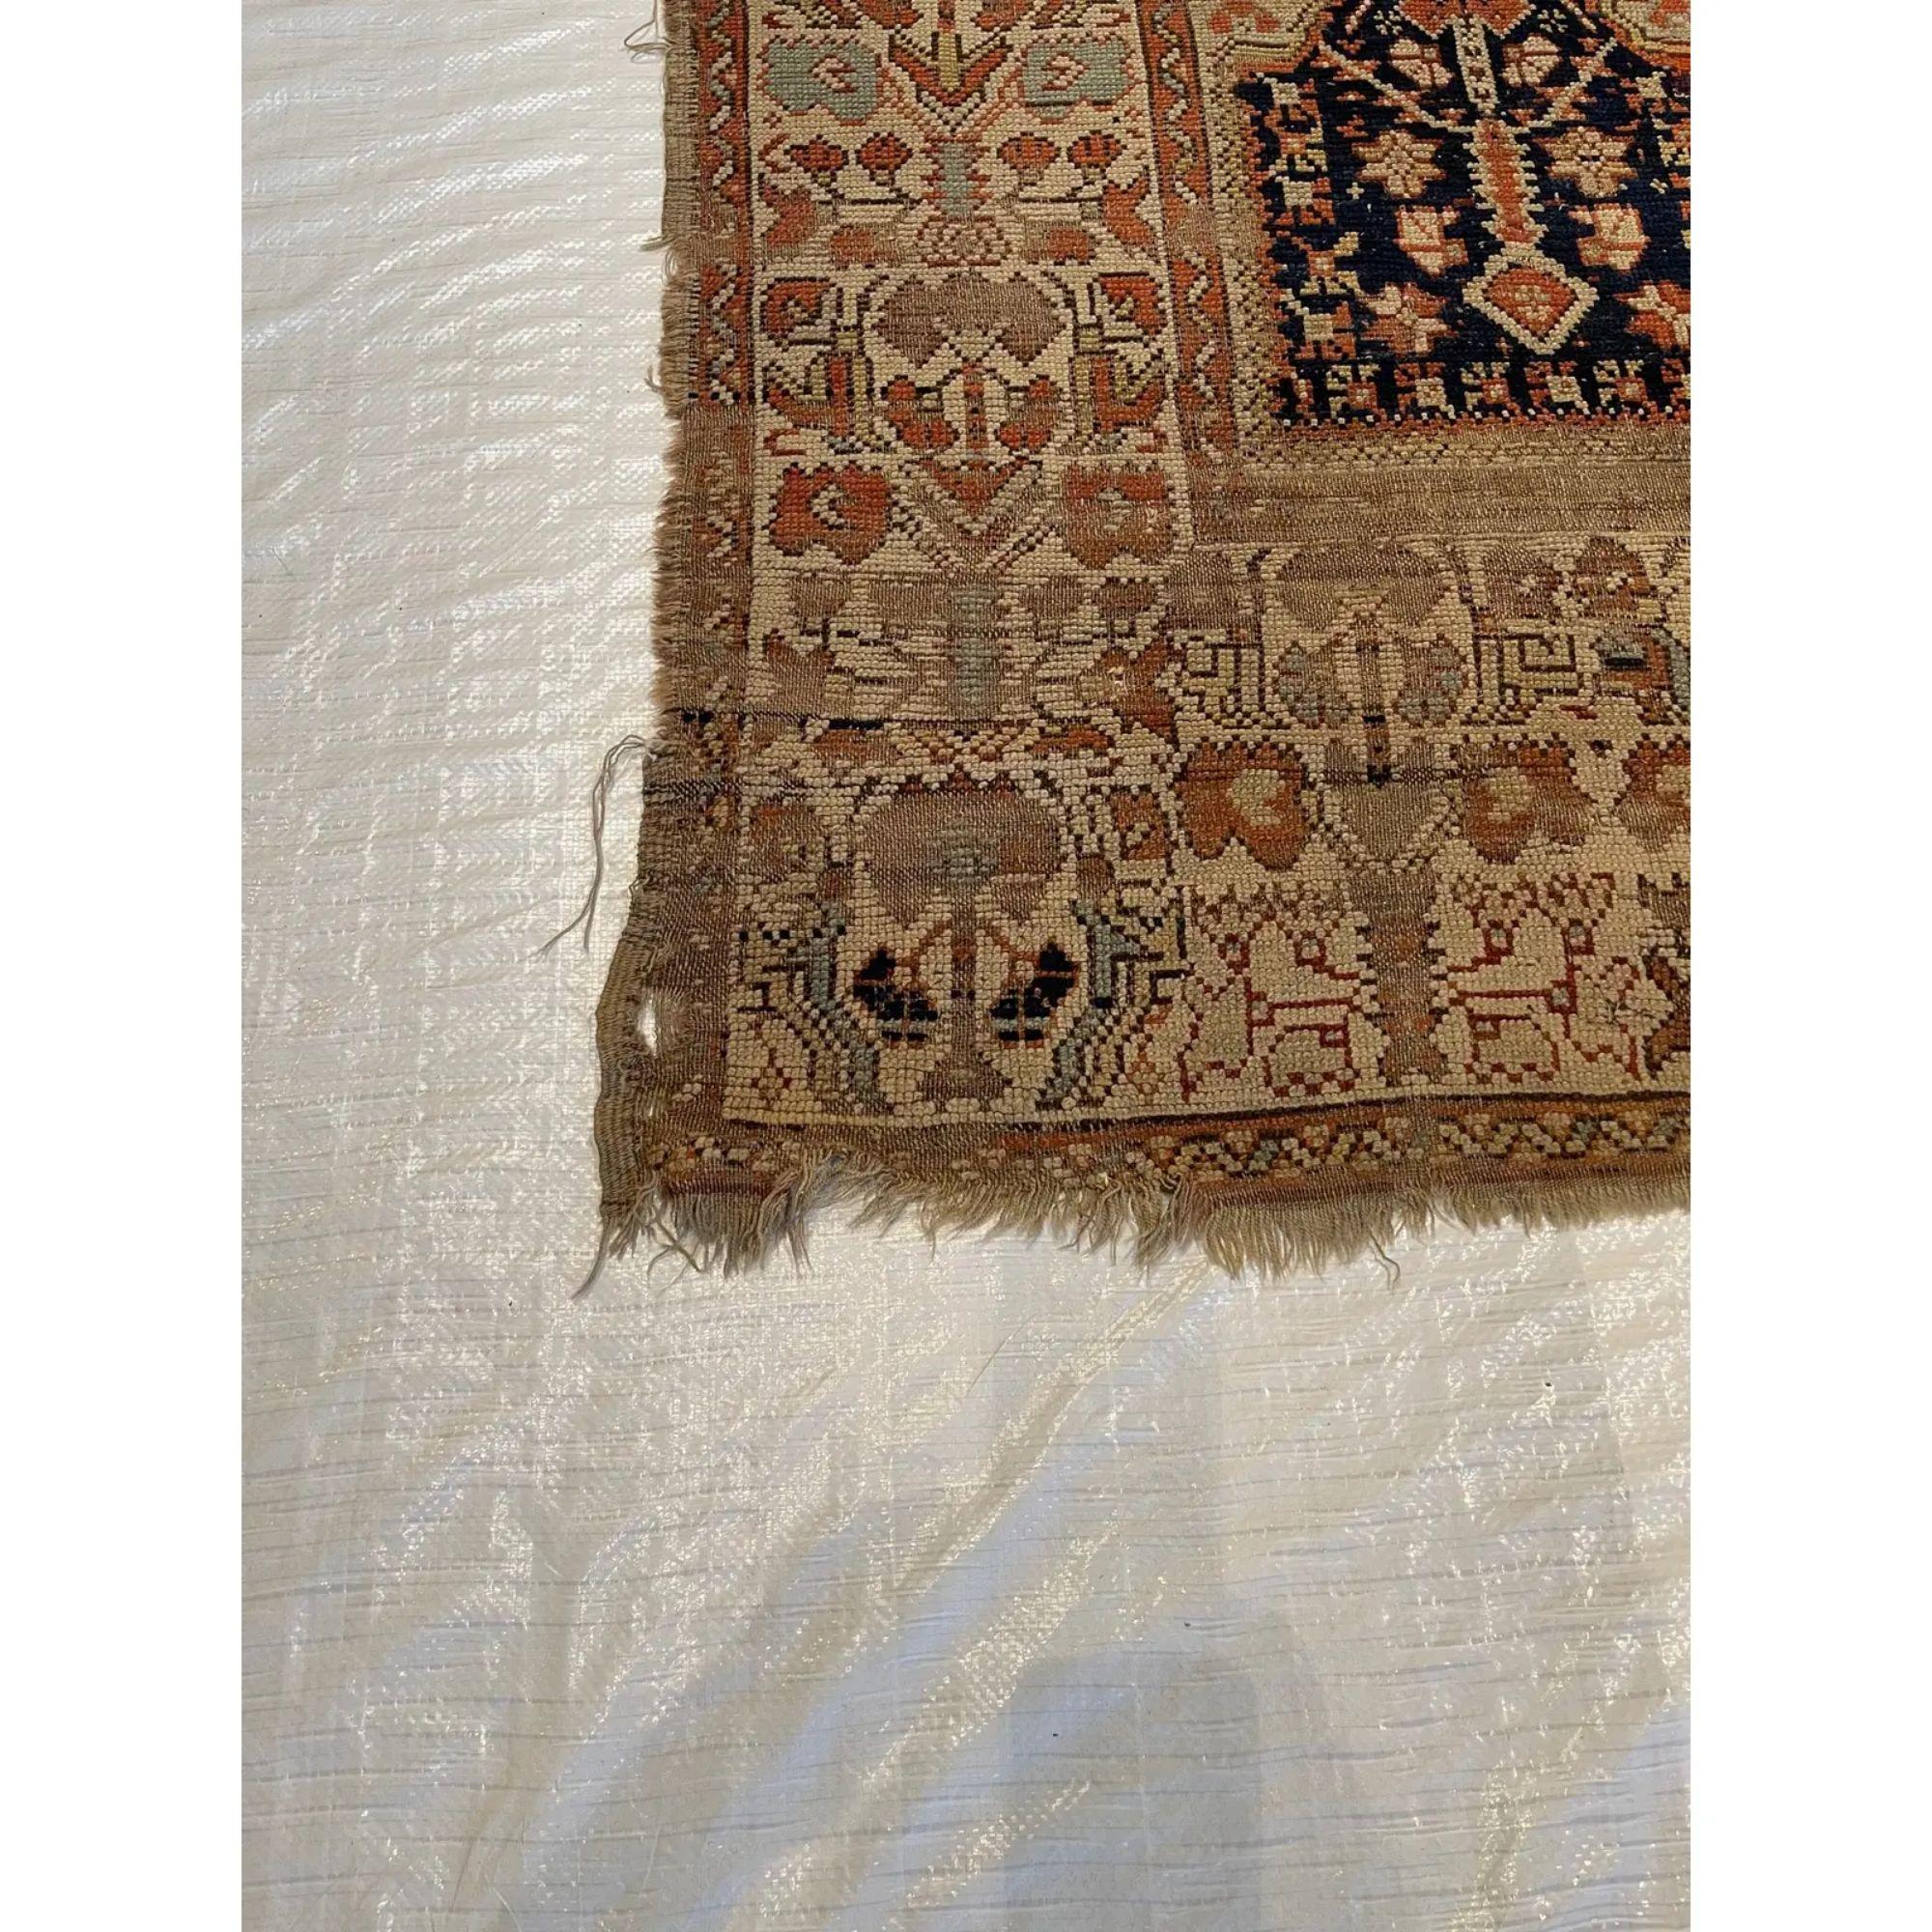 Early-18th Century Antique Prayer Turkish Rug 4'6'' X 3'3'', From 1800s, wool on wool foundation super vintage and unique.